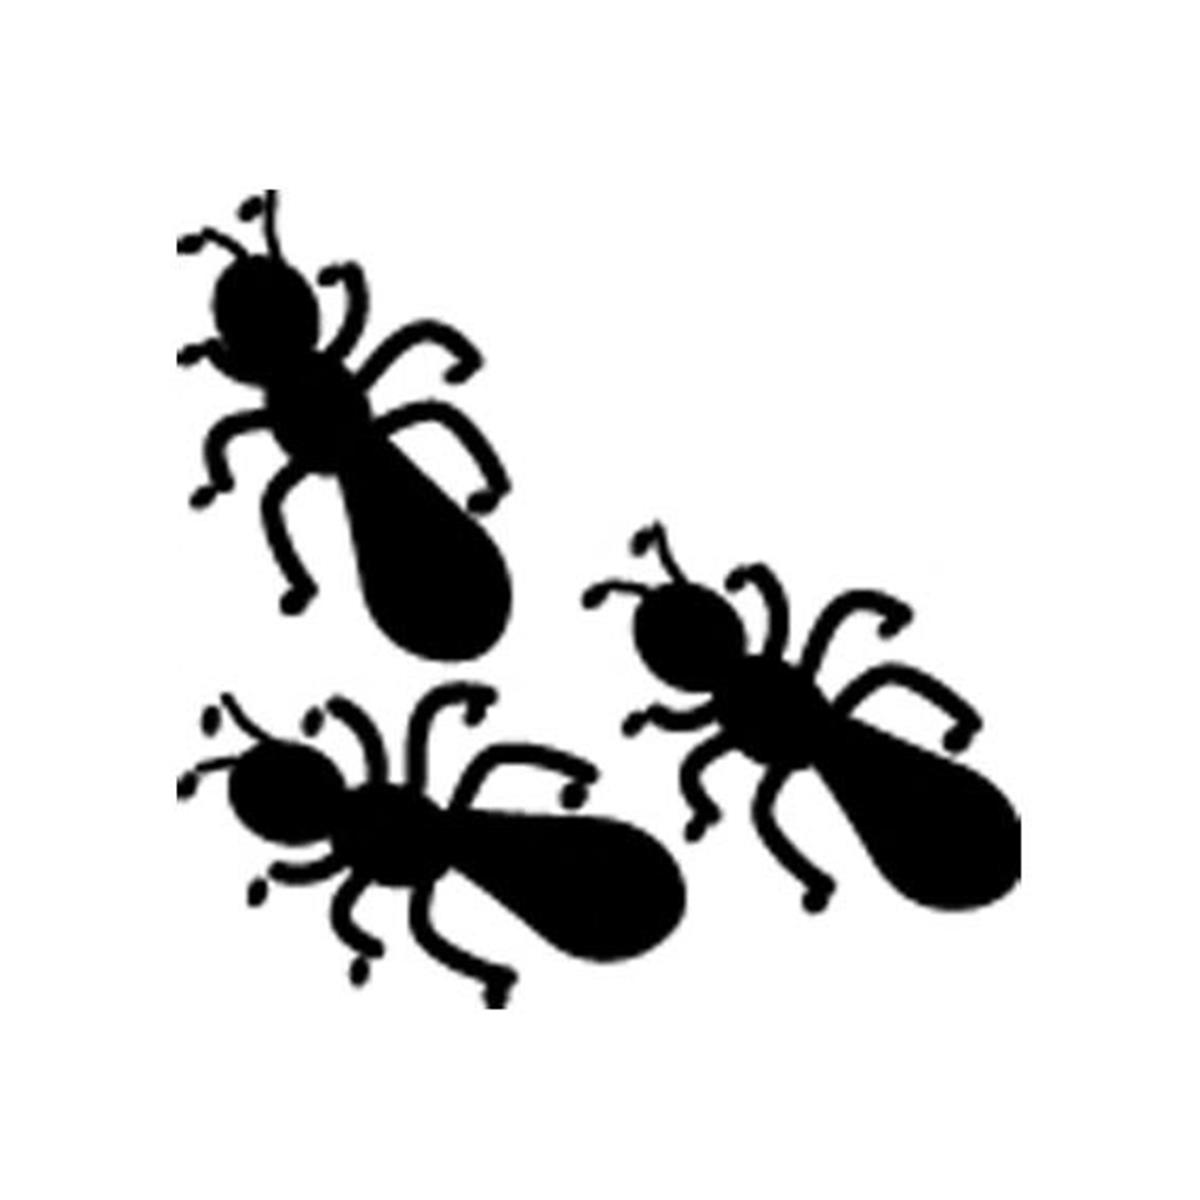 Picture of Creative Shapes Etc SE-0472 0.5 x 0.5 in. Incentive Stamp - Ants